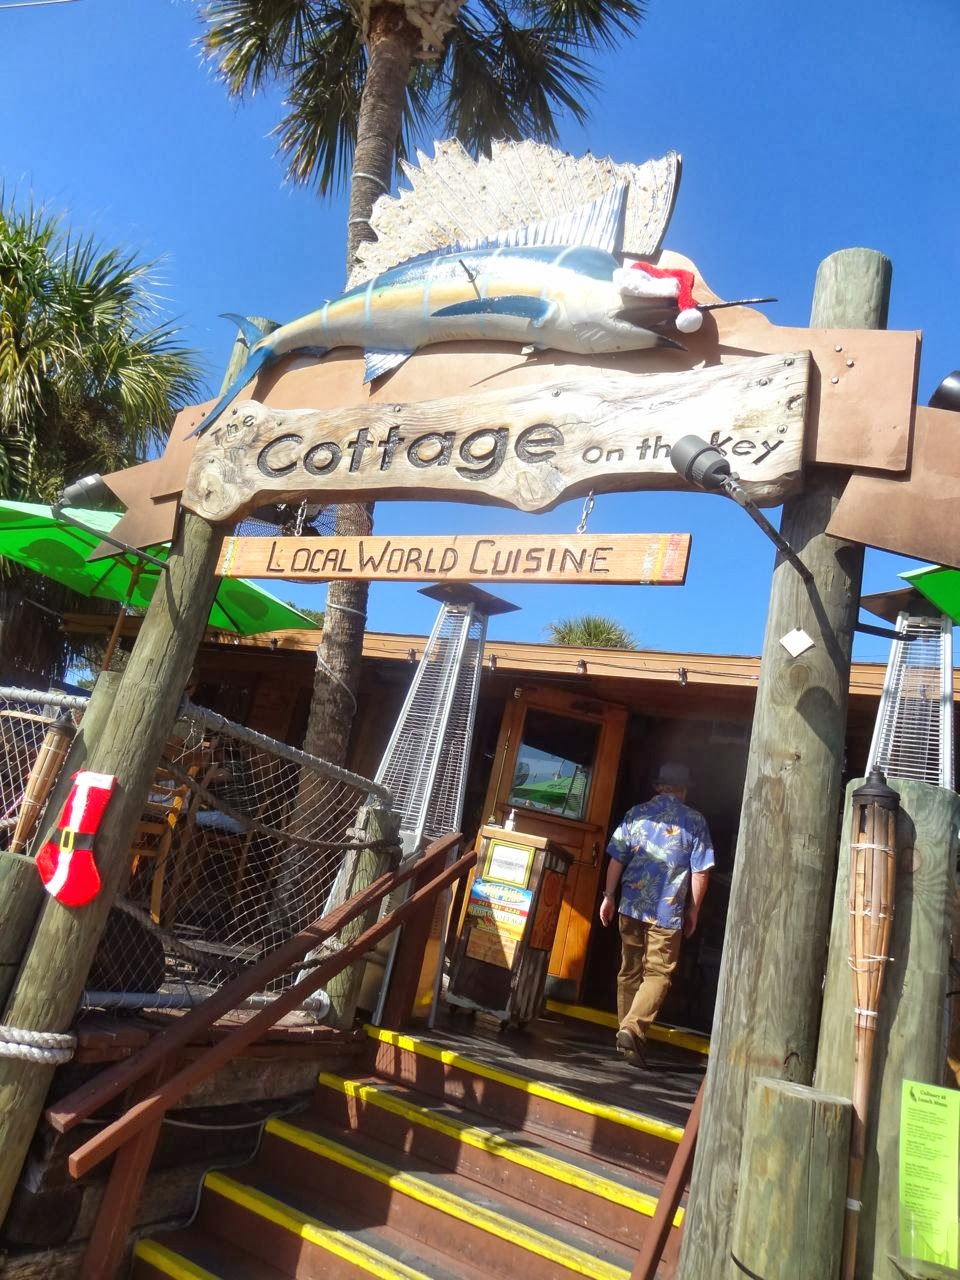 Scrumpdillyicious The Cottage On Siesta Key Tropical Fusion Cuisine